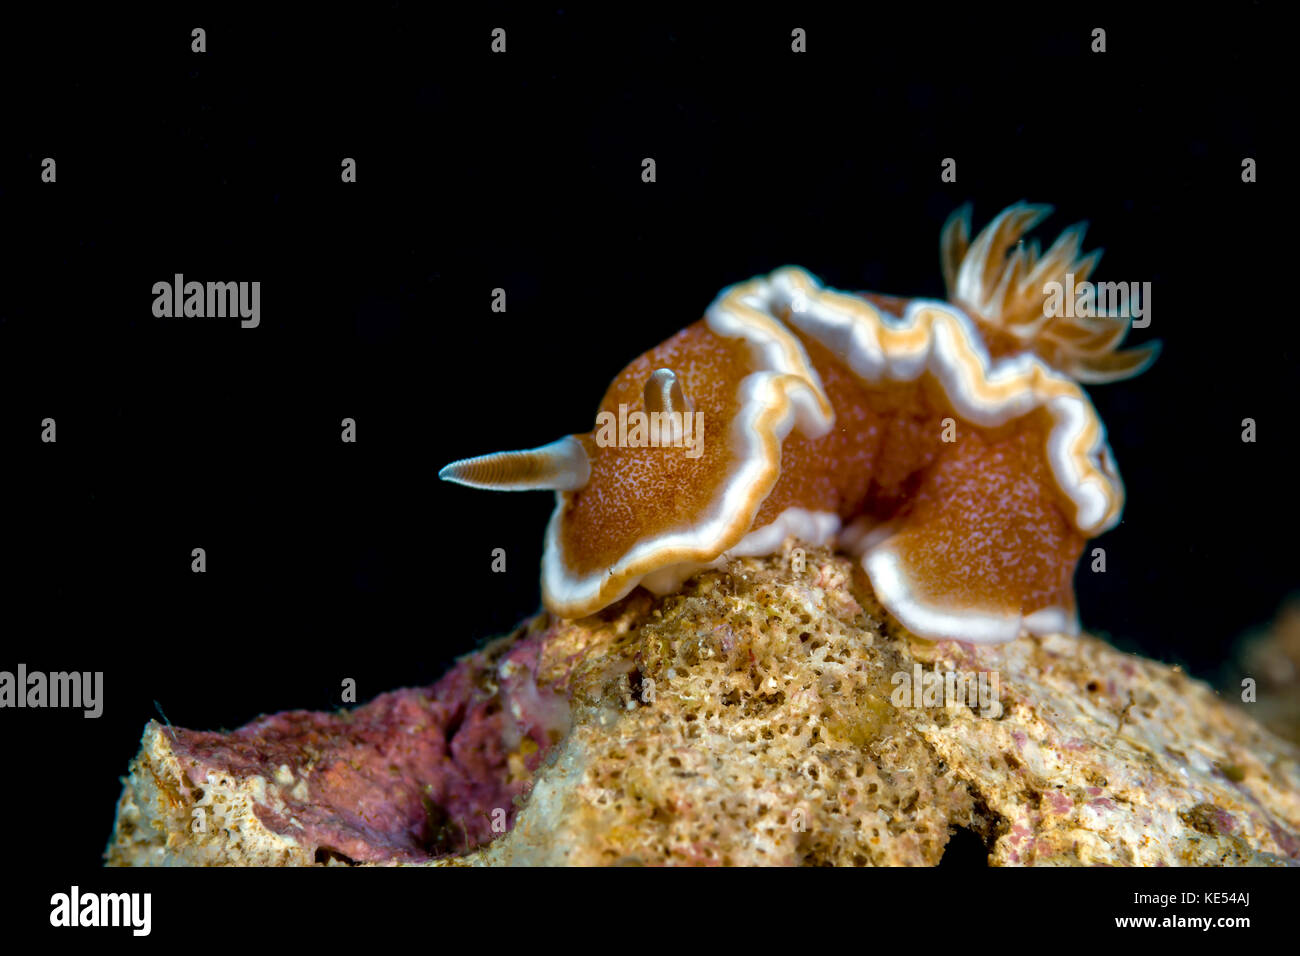 Brown-marge glossodoris nudibranch, New Ireland, Papouasie Nouvelle Guinée. Banque D'Images